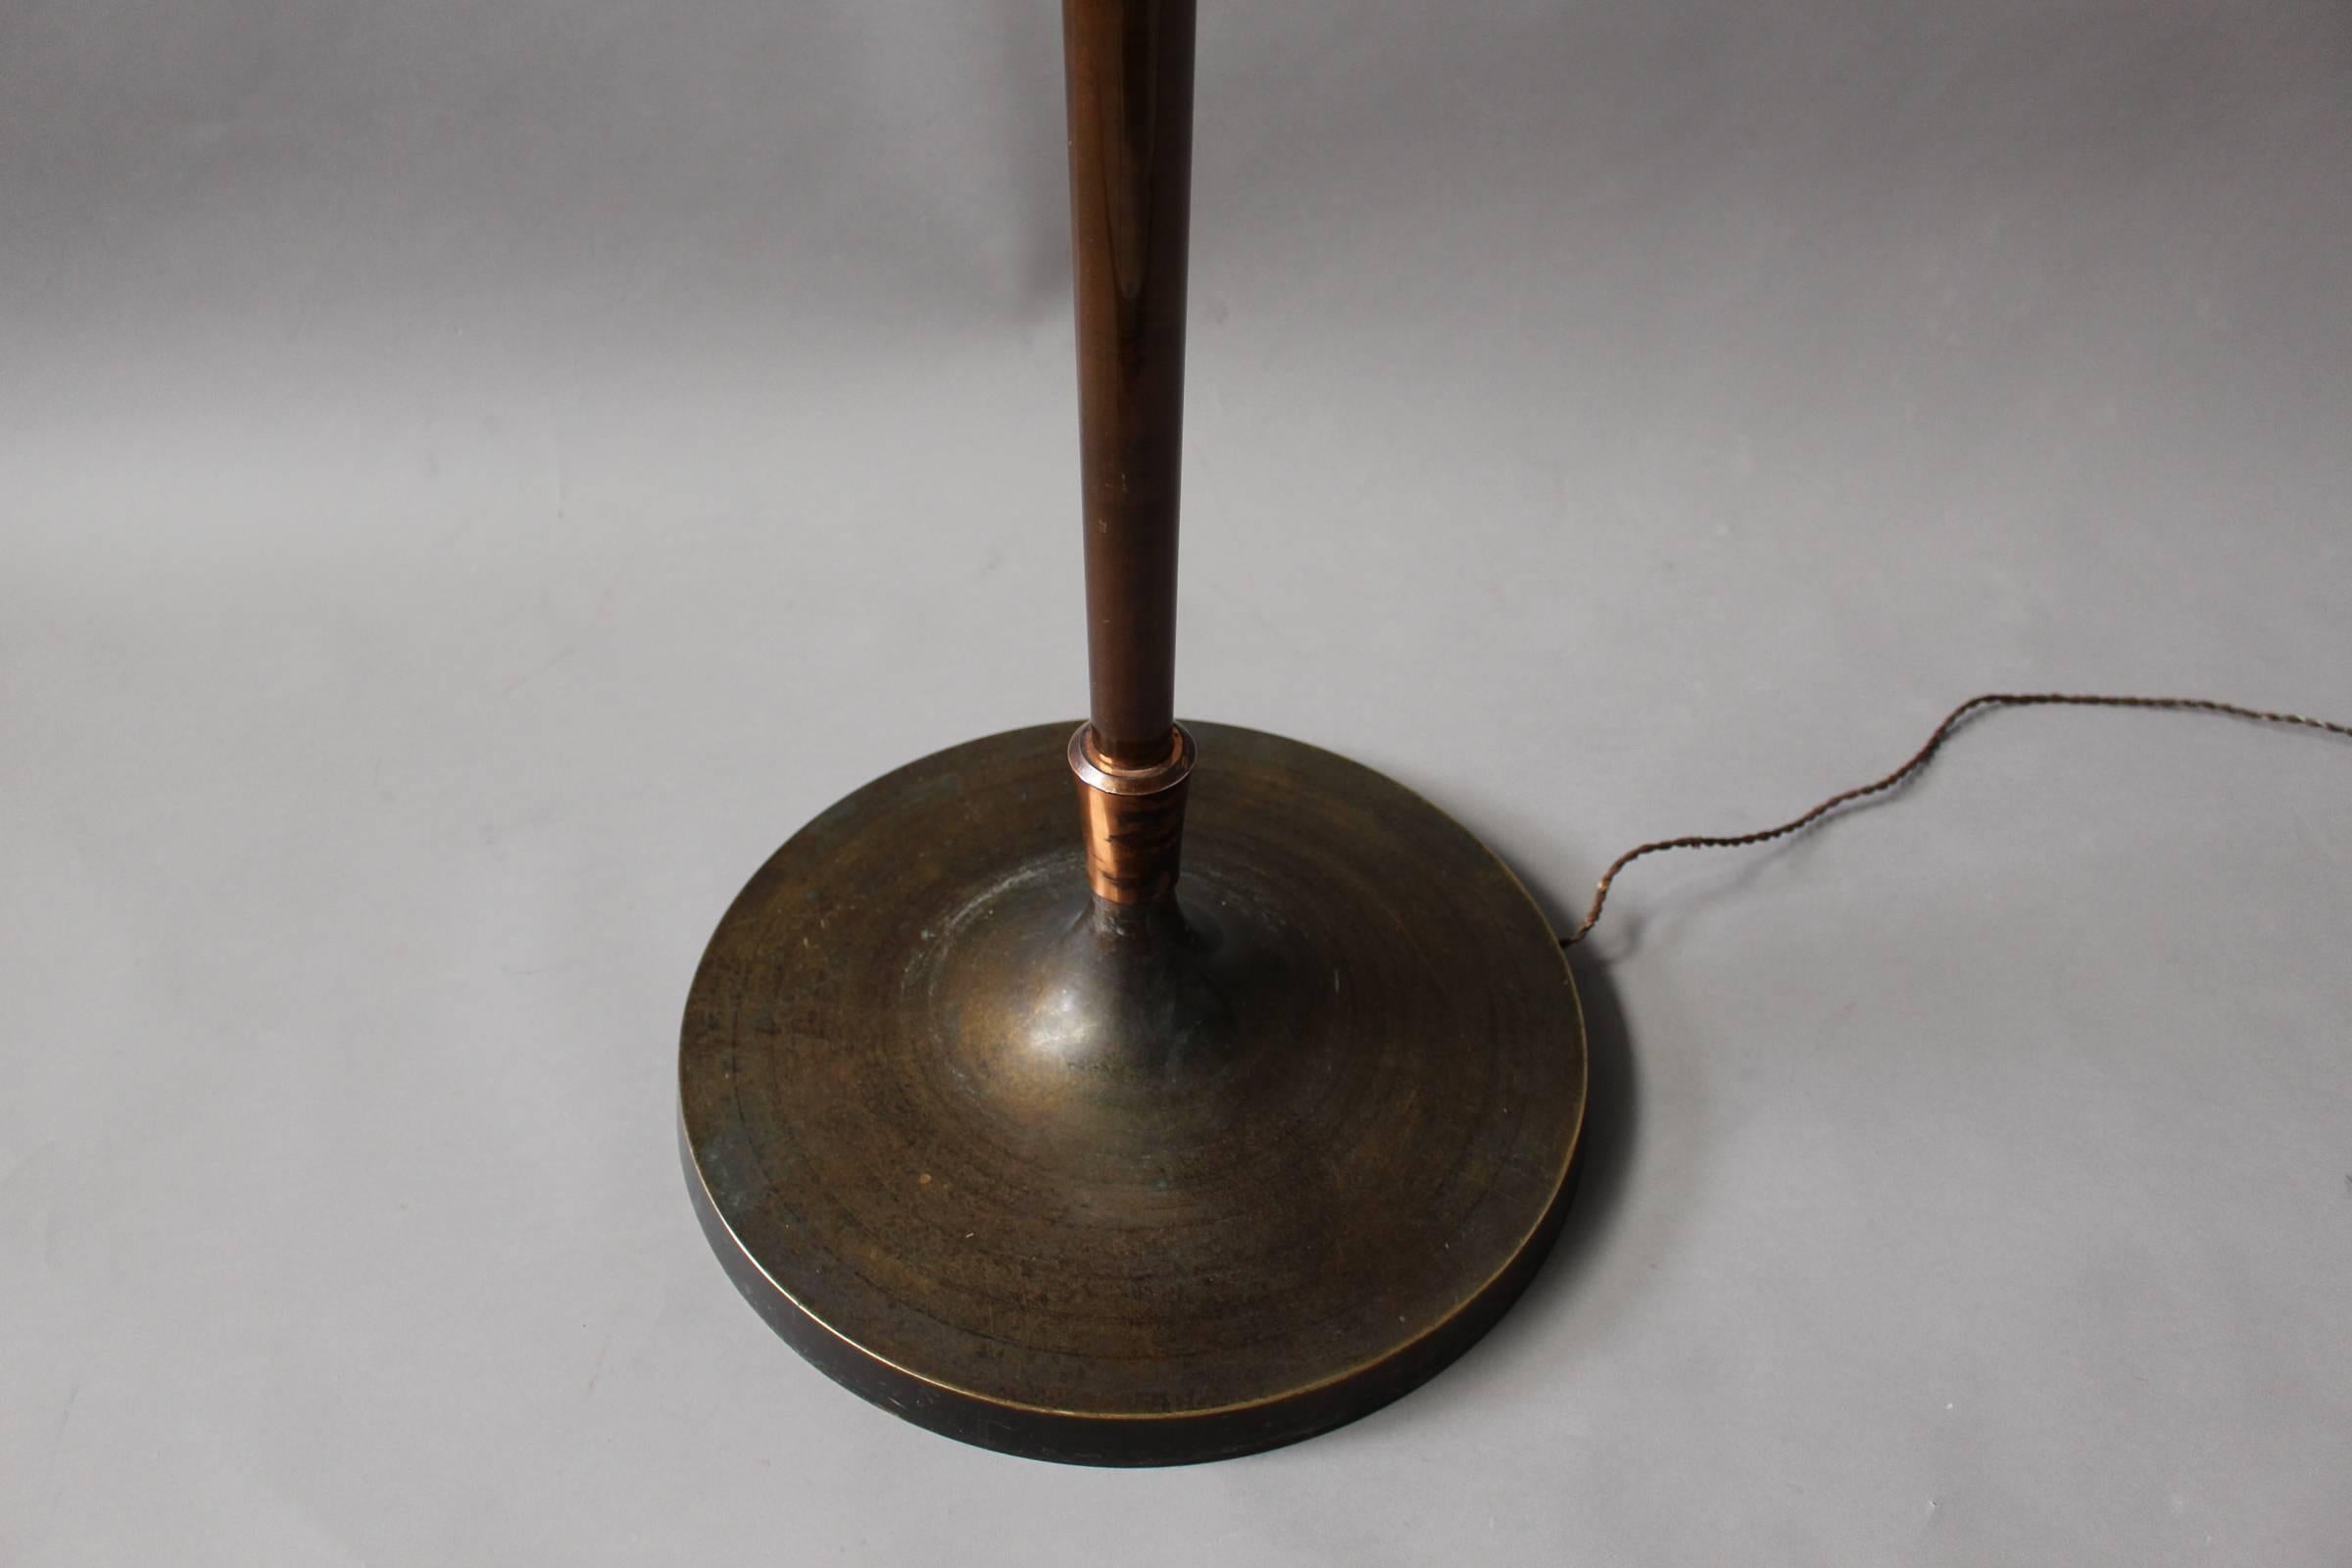 A Fine French Art Deco Floor Lamp by Genet et Michon In Good Condition For Sale In Long Island City, NY